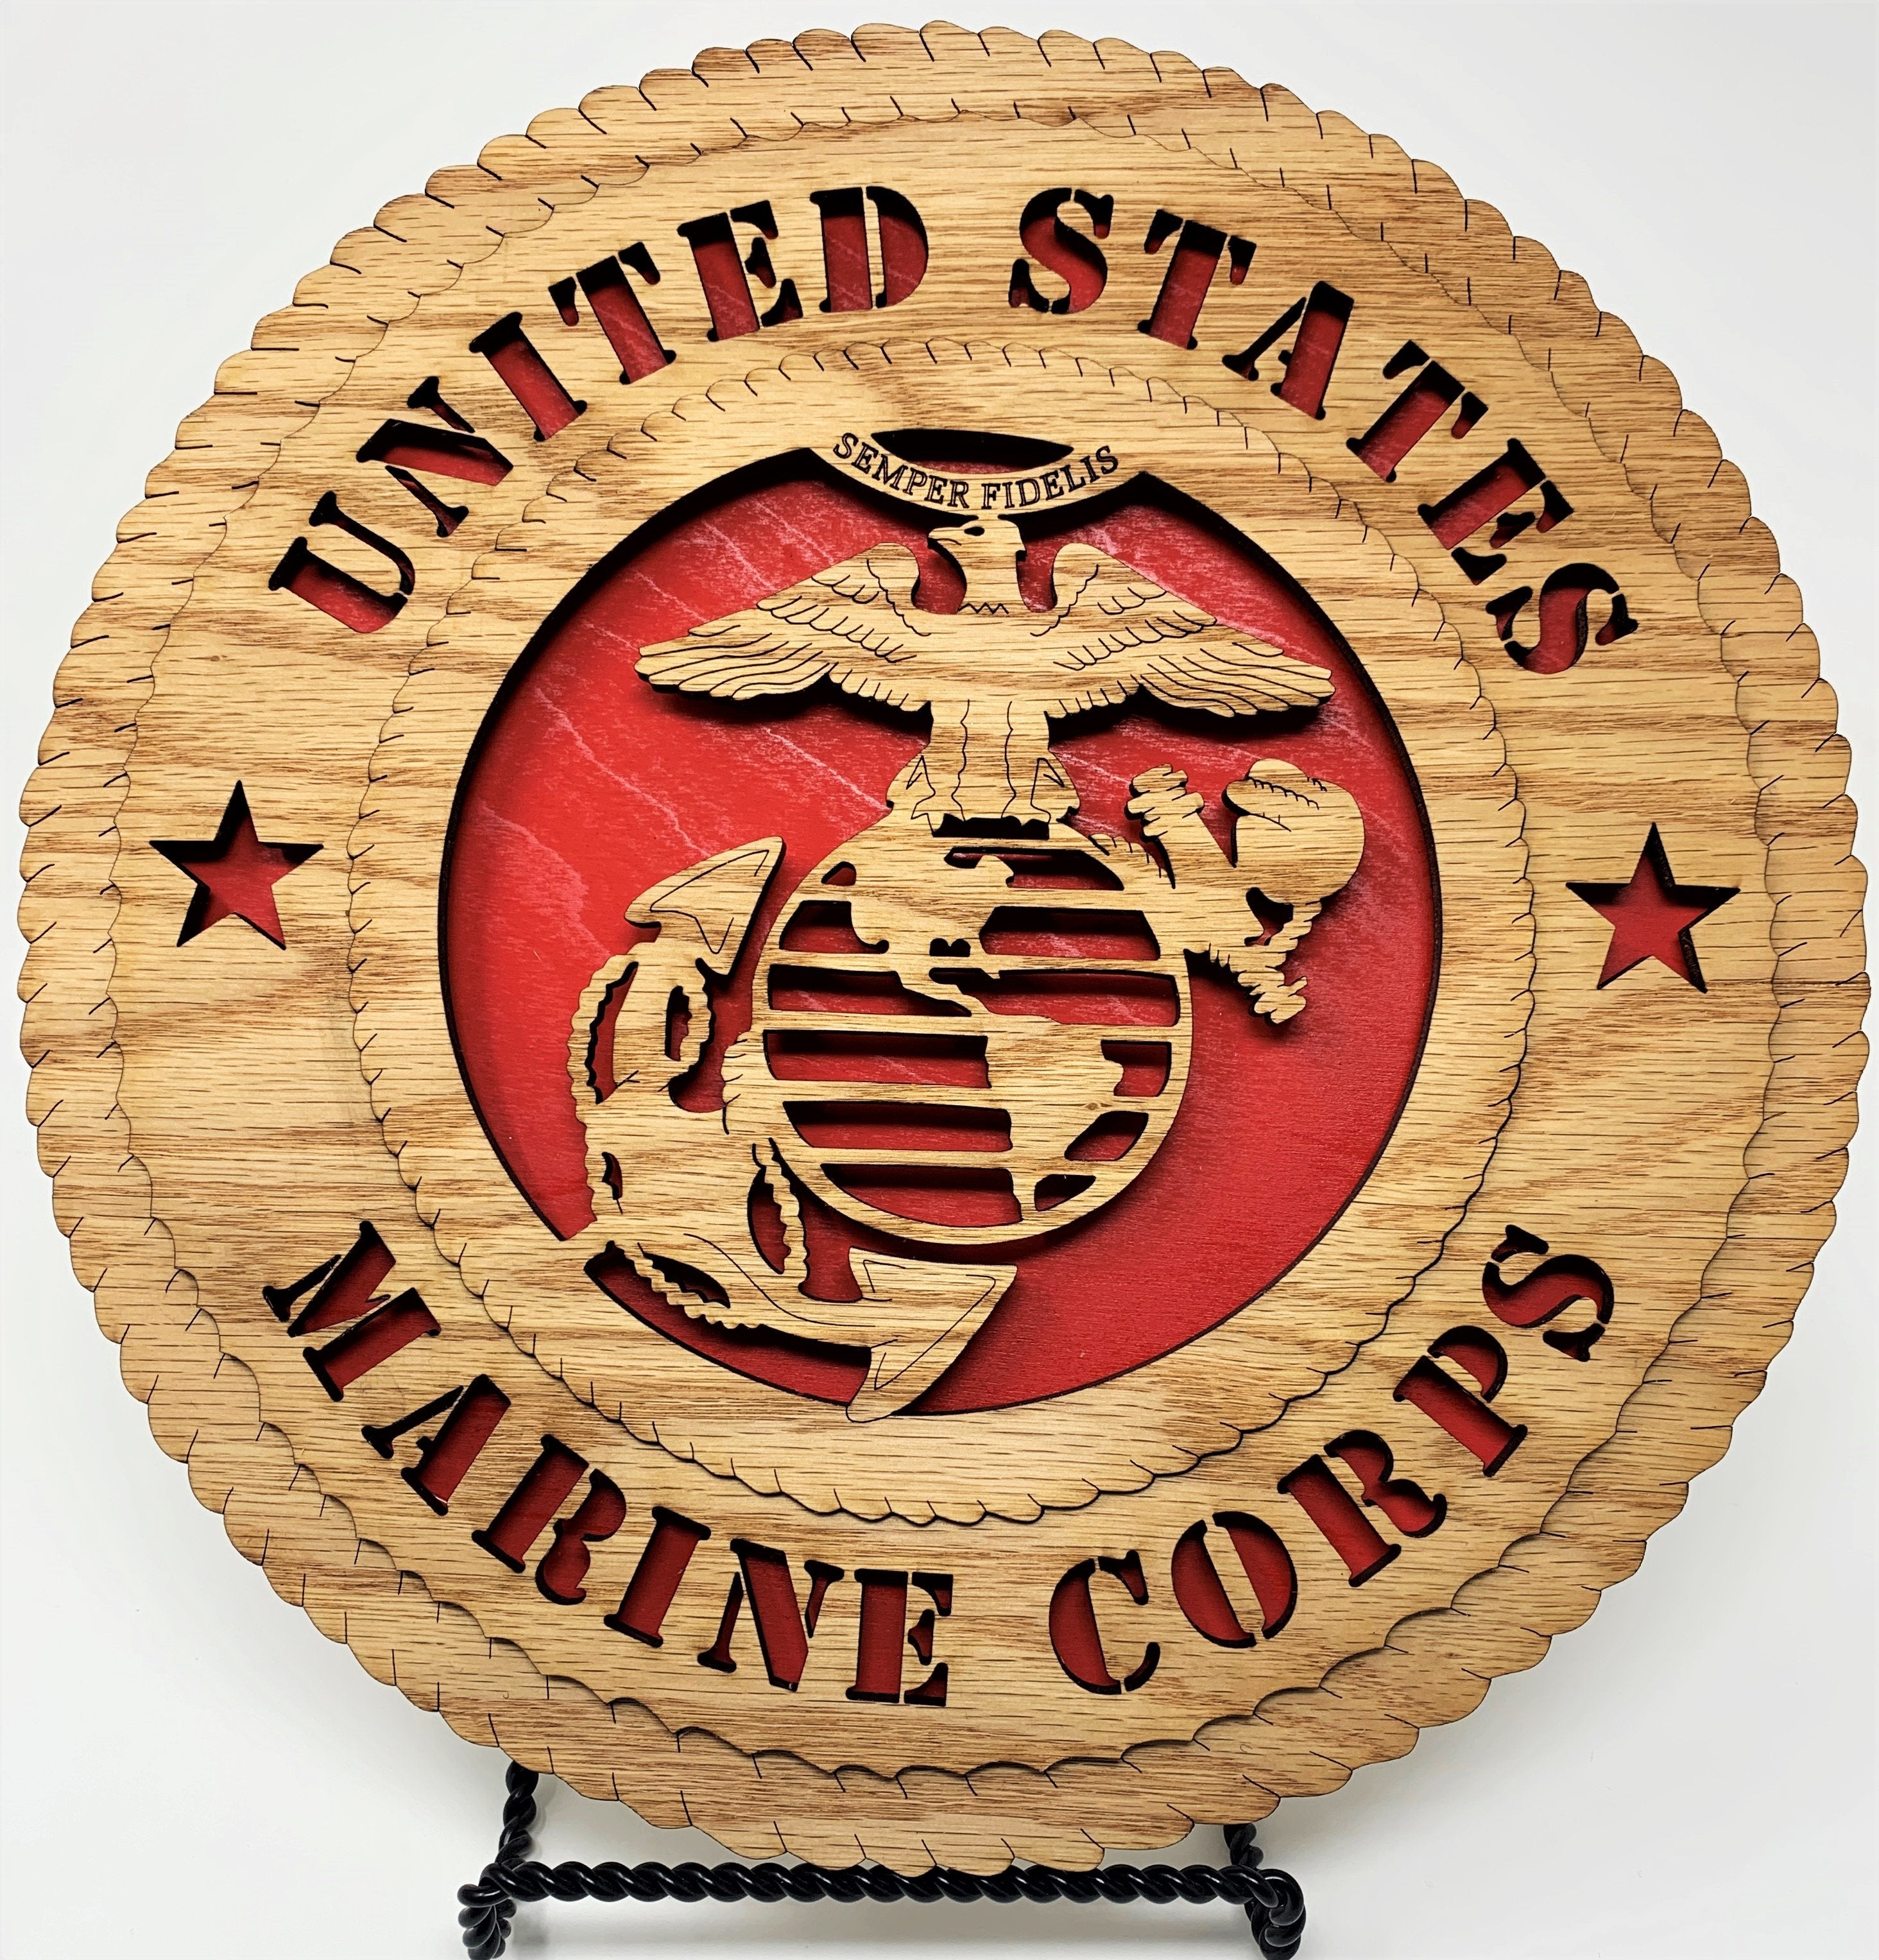 Laser Pics and Gifts:  Standard Marine Corps Plaque - Laser Pics & Gifts